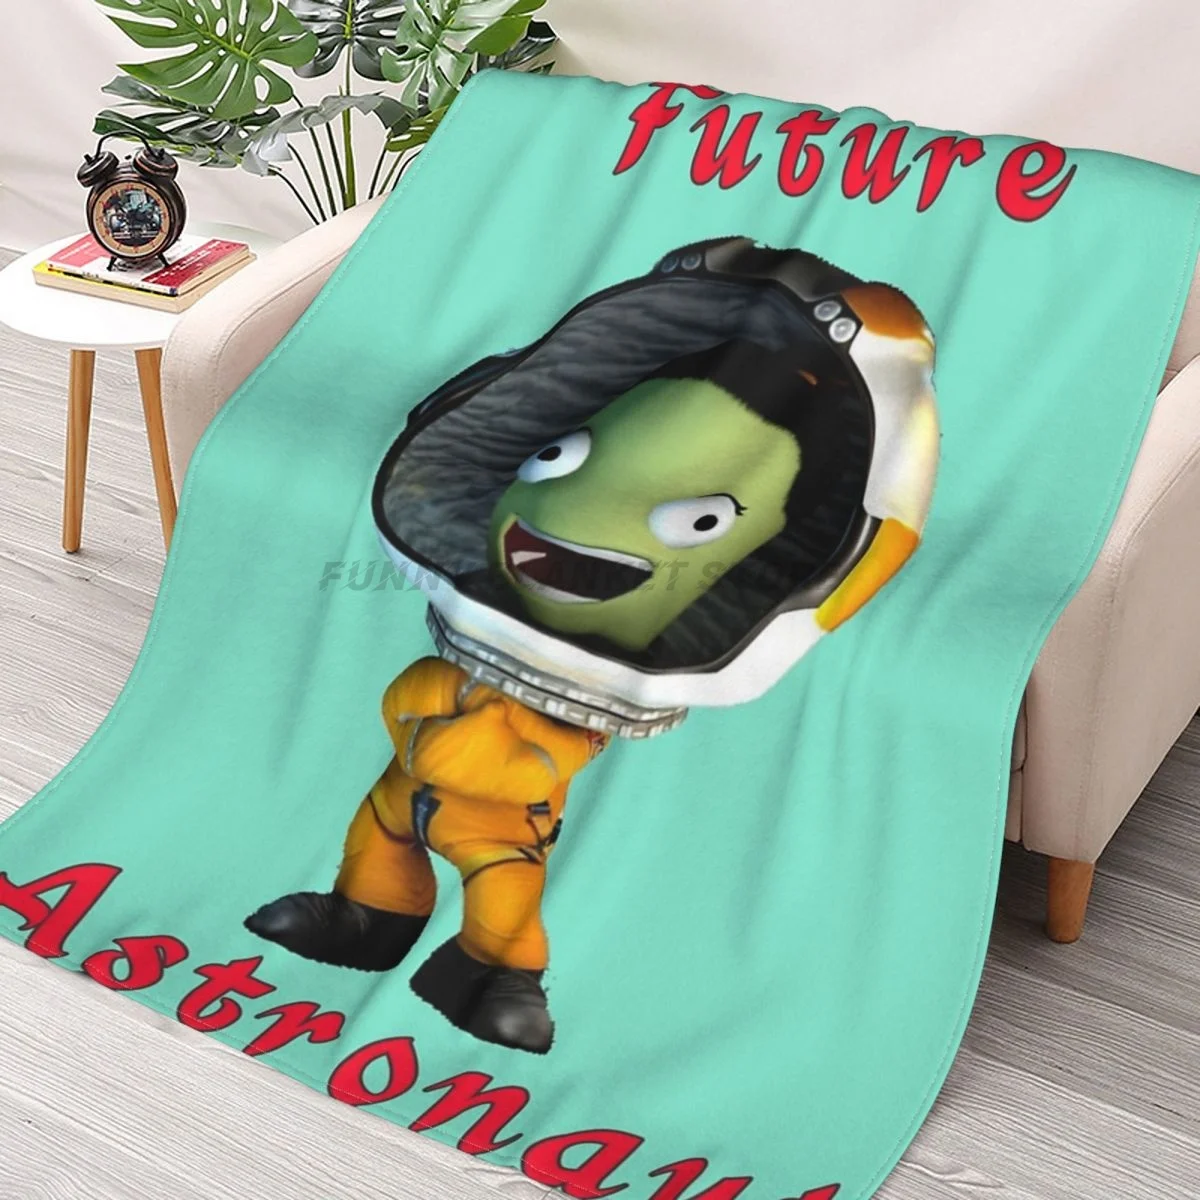 

Future Astronaut , Kerbal Spacecraft Program Throws Blankets Collage Flannel Ultra-Soft Warm picnic blanket bedspread on the bed